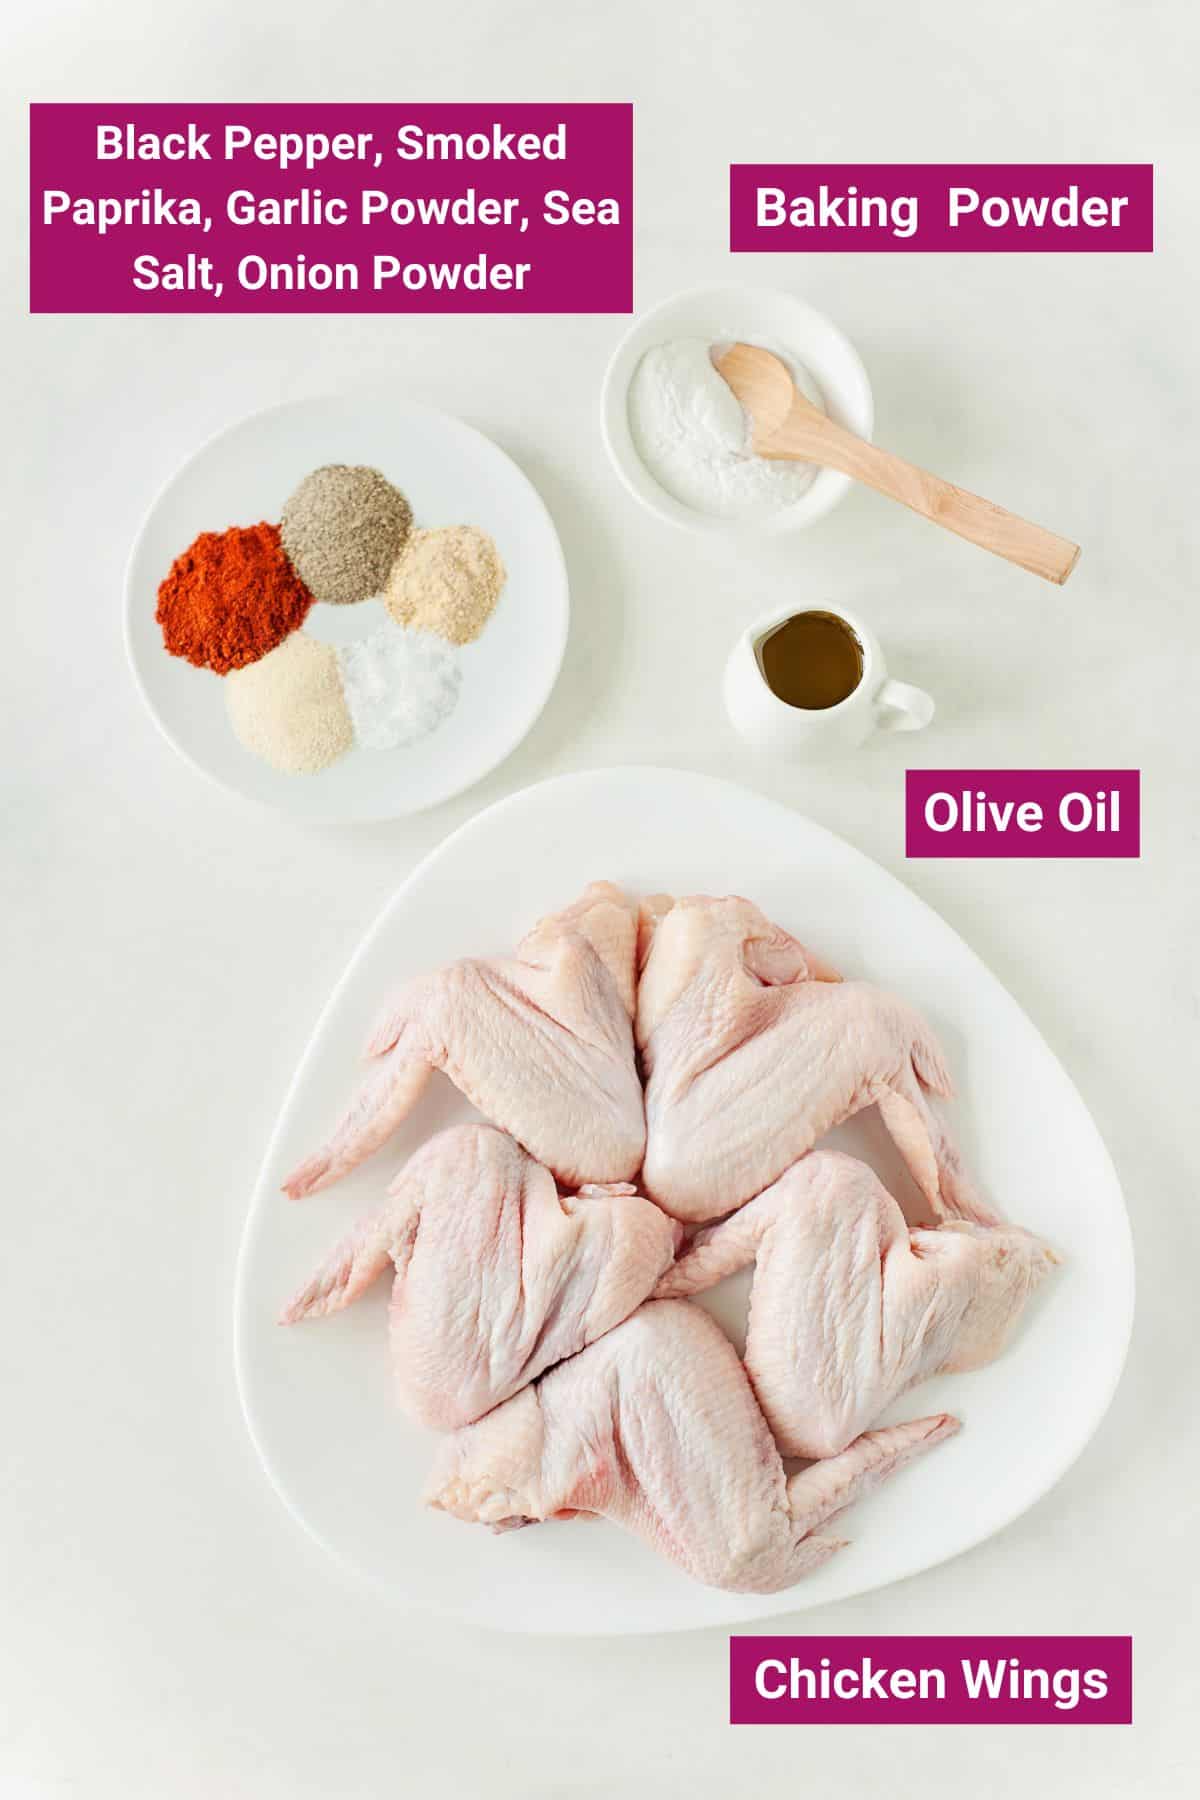 baking powder, different spices, olive oil and chicken wings on separate containers